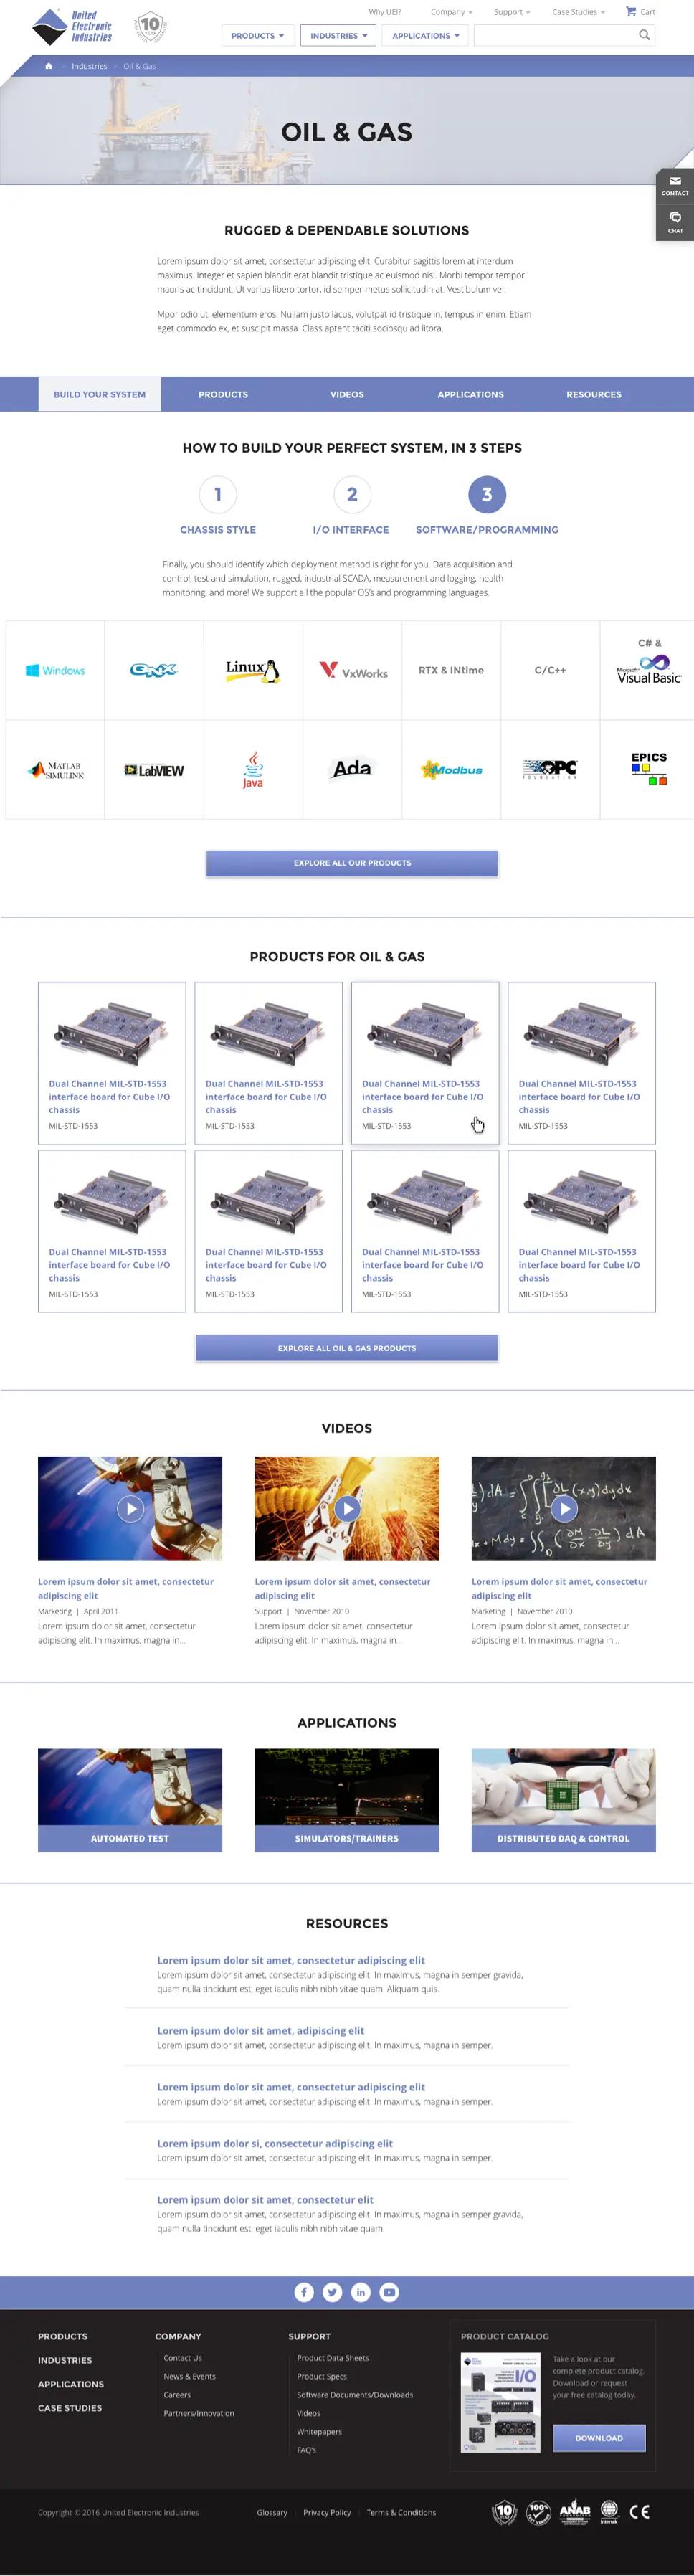 A screenshot of an United Electronic Industries "Industry" page.